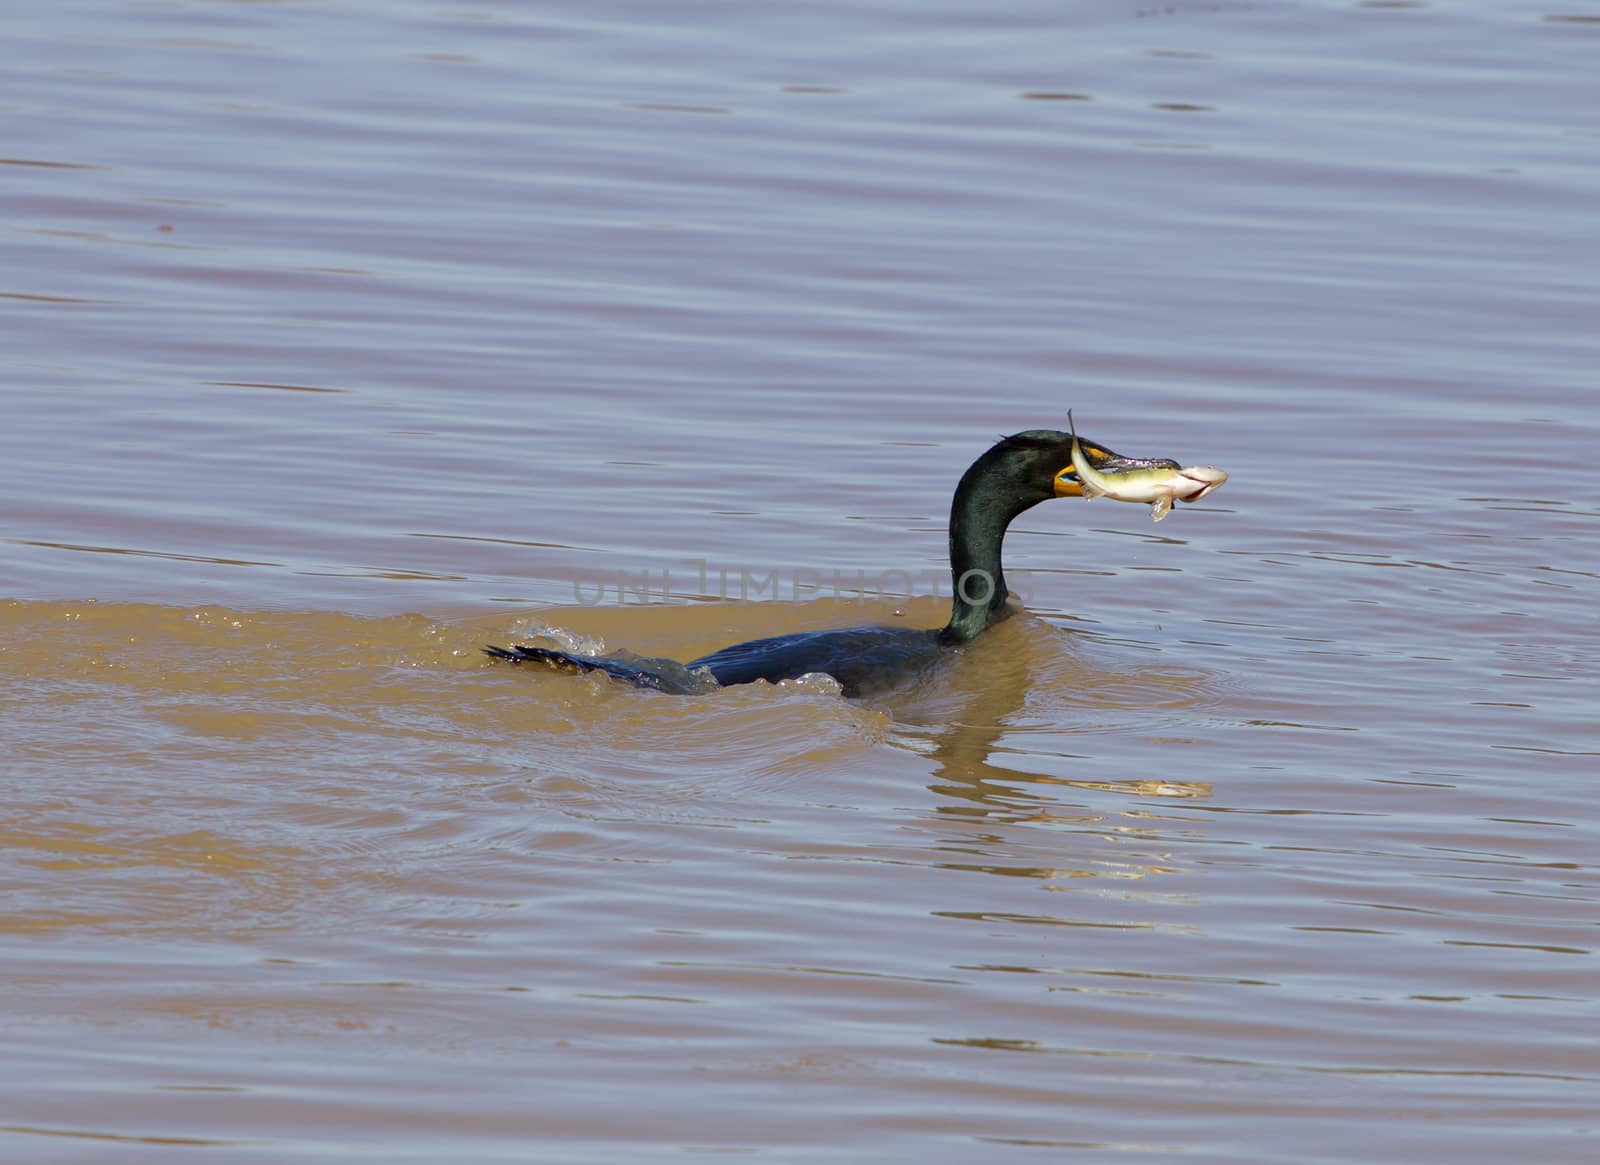 The lucky fishing of the cormorant